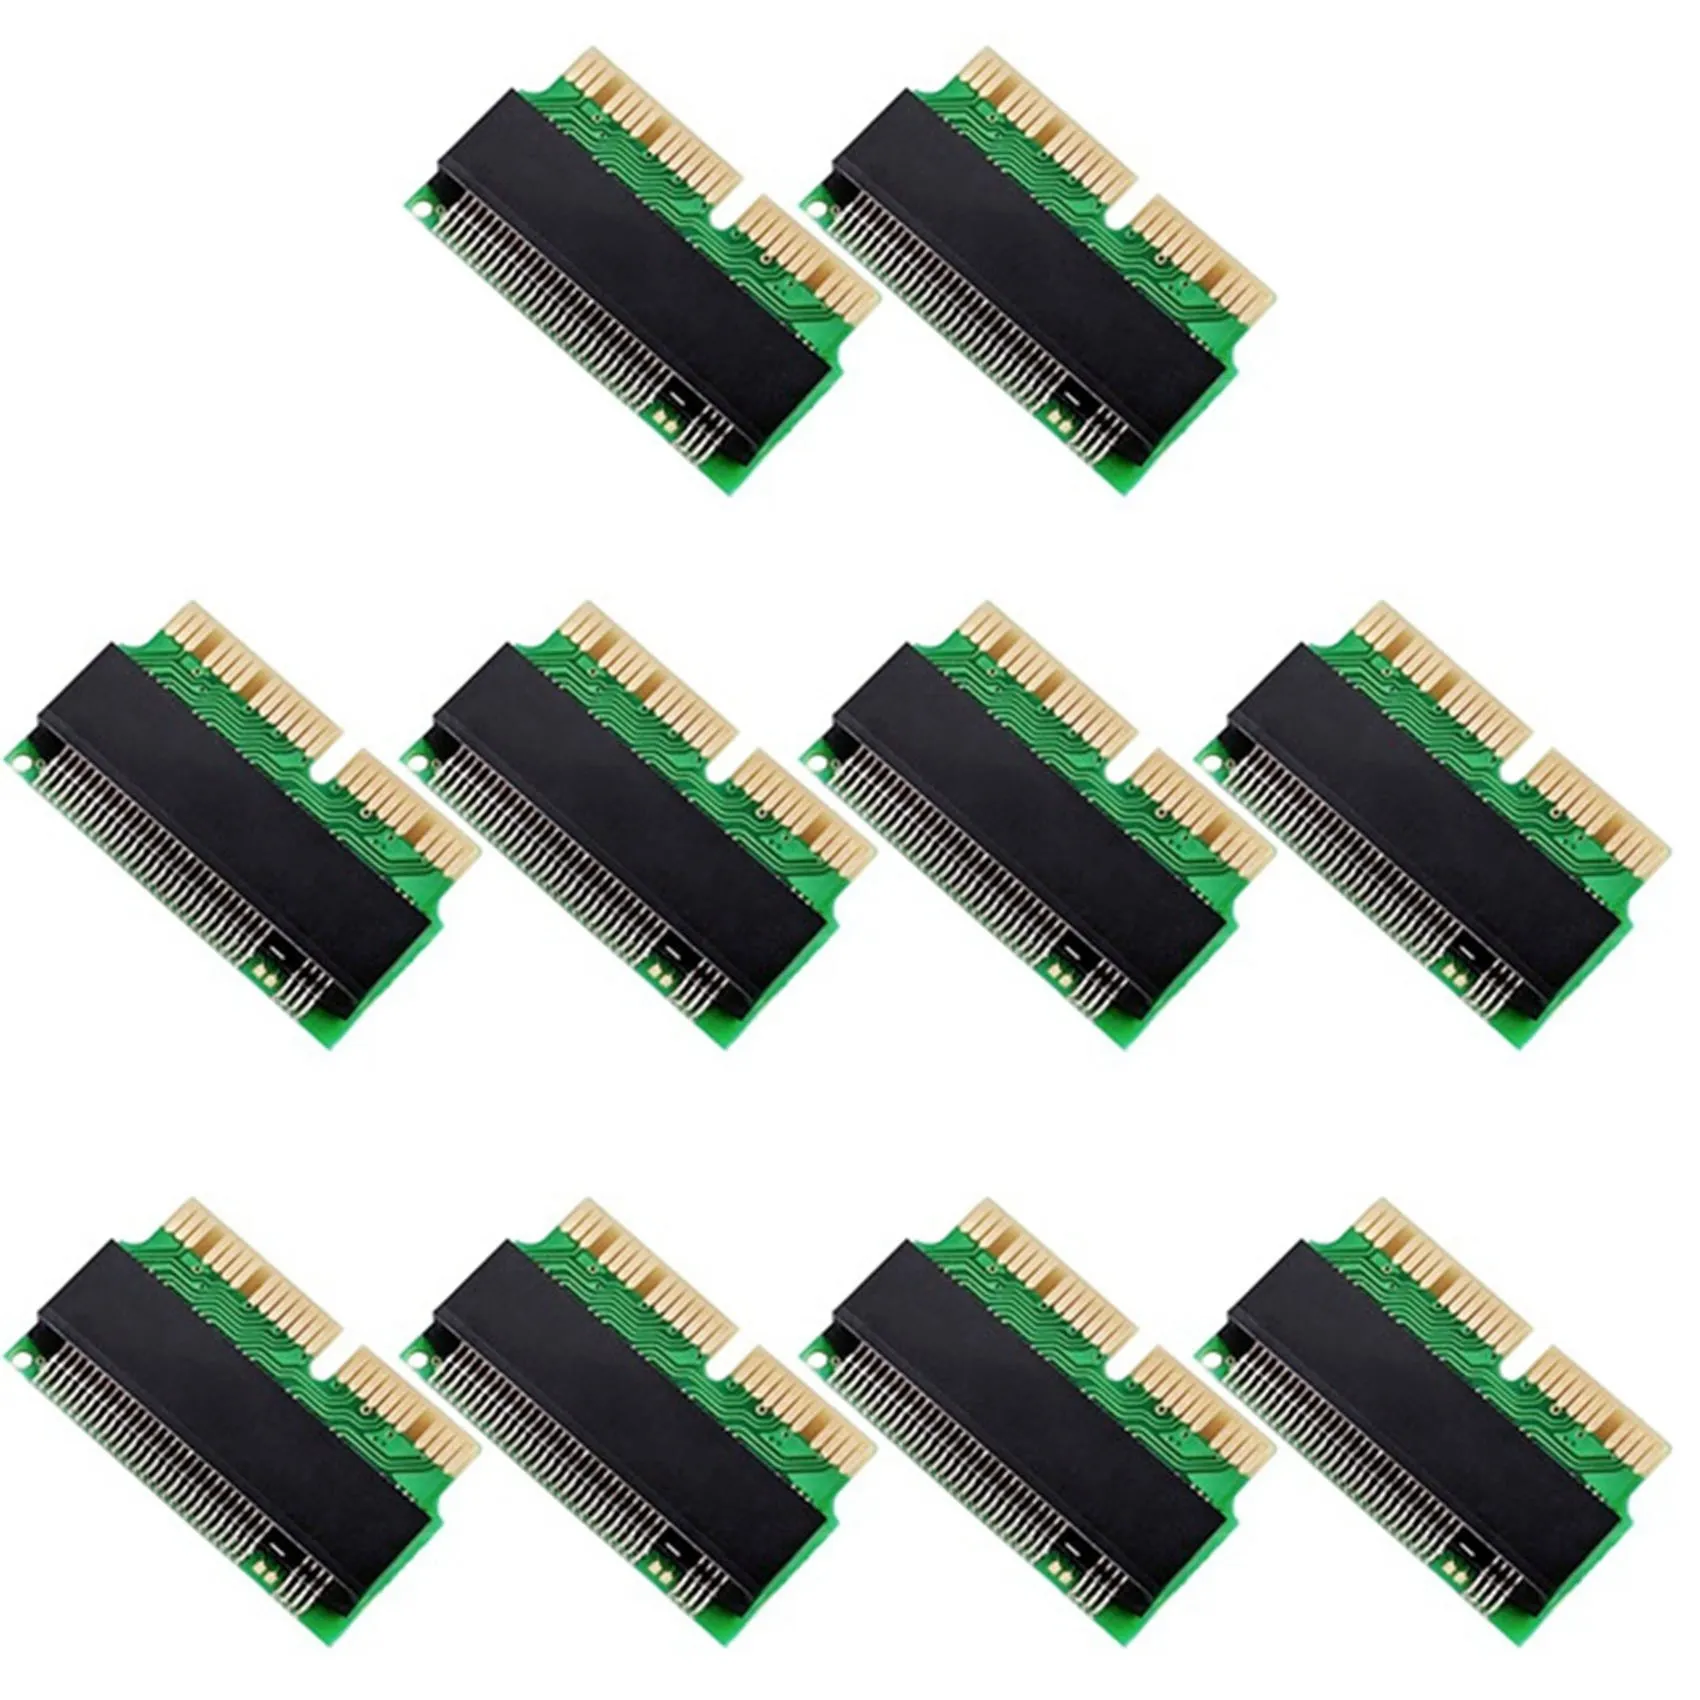 

10PCS NVMe PCIe M.2 M Key M2 SSD Adapter Card for A1465 A1466 for Pro A1398 A1502 Expansion Card